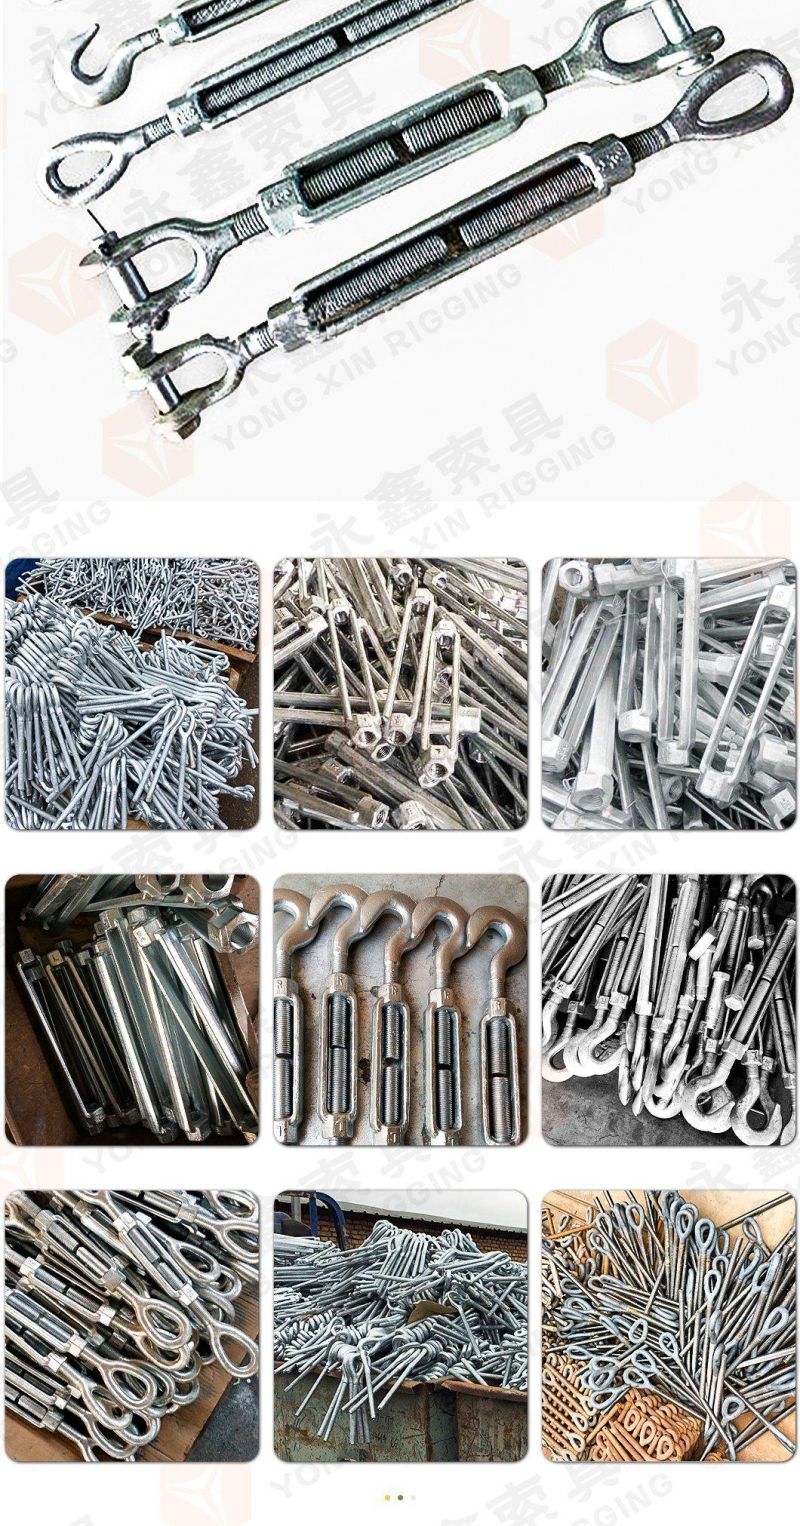 Drop Forged Carbon Steel Us Type Hg226 Eye and Eye Turnbuckles